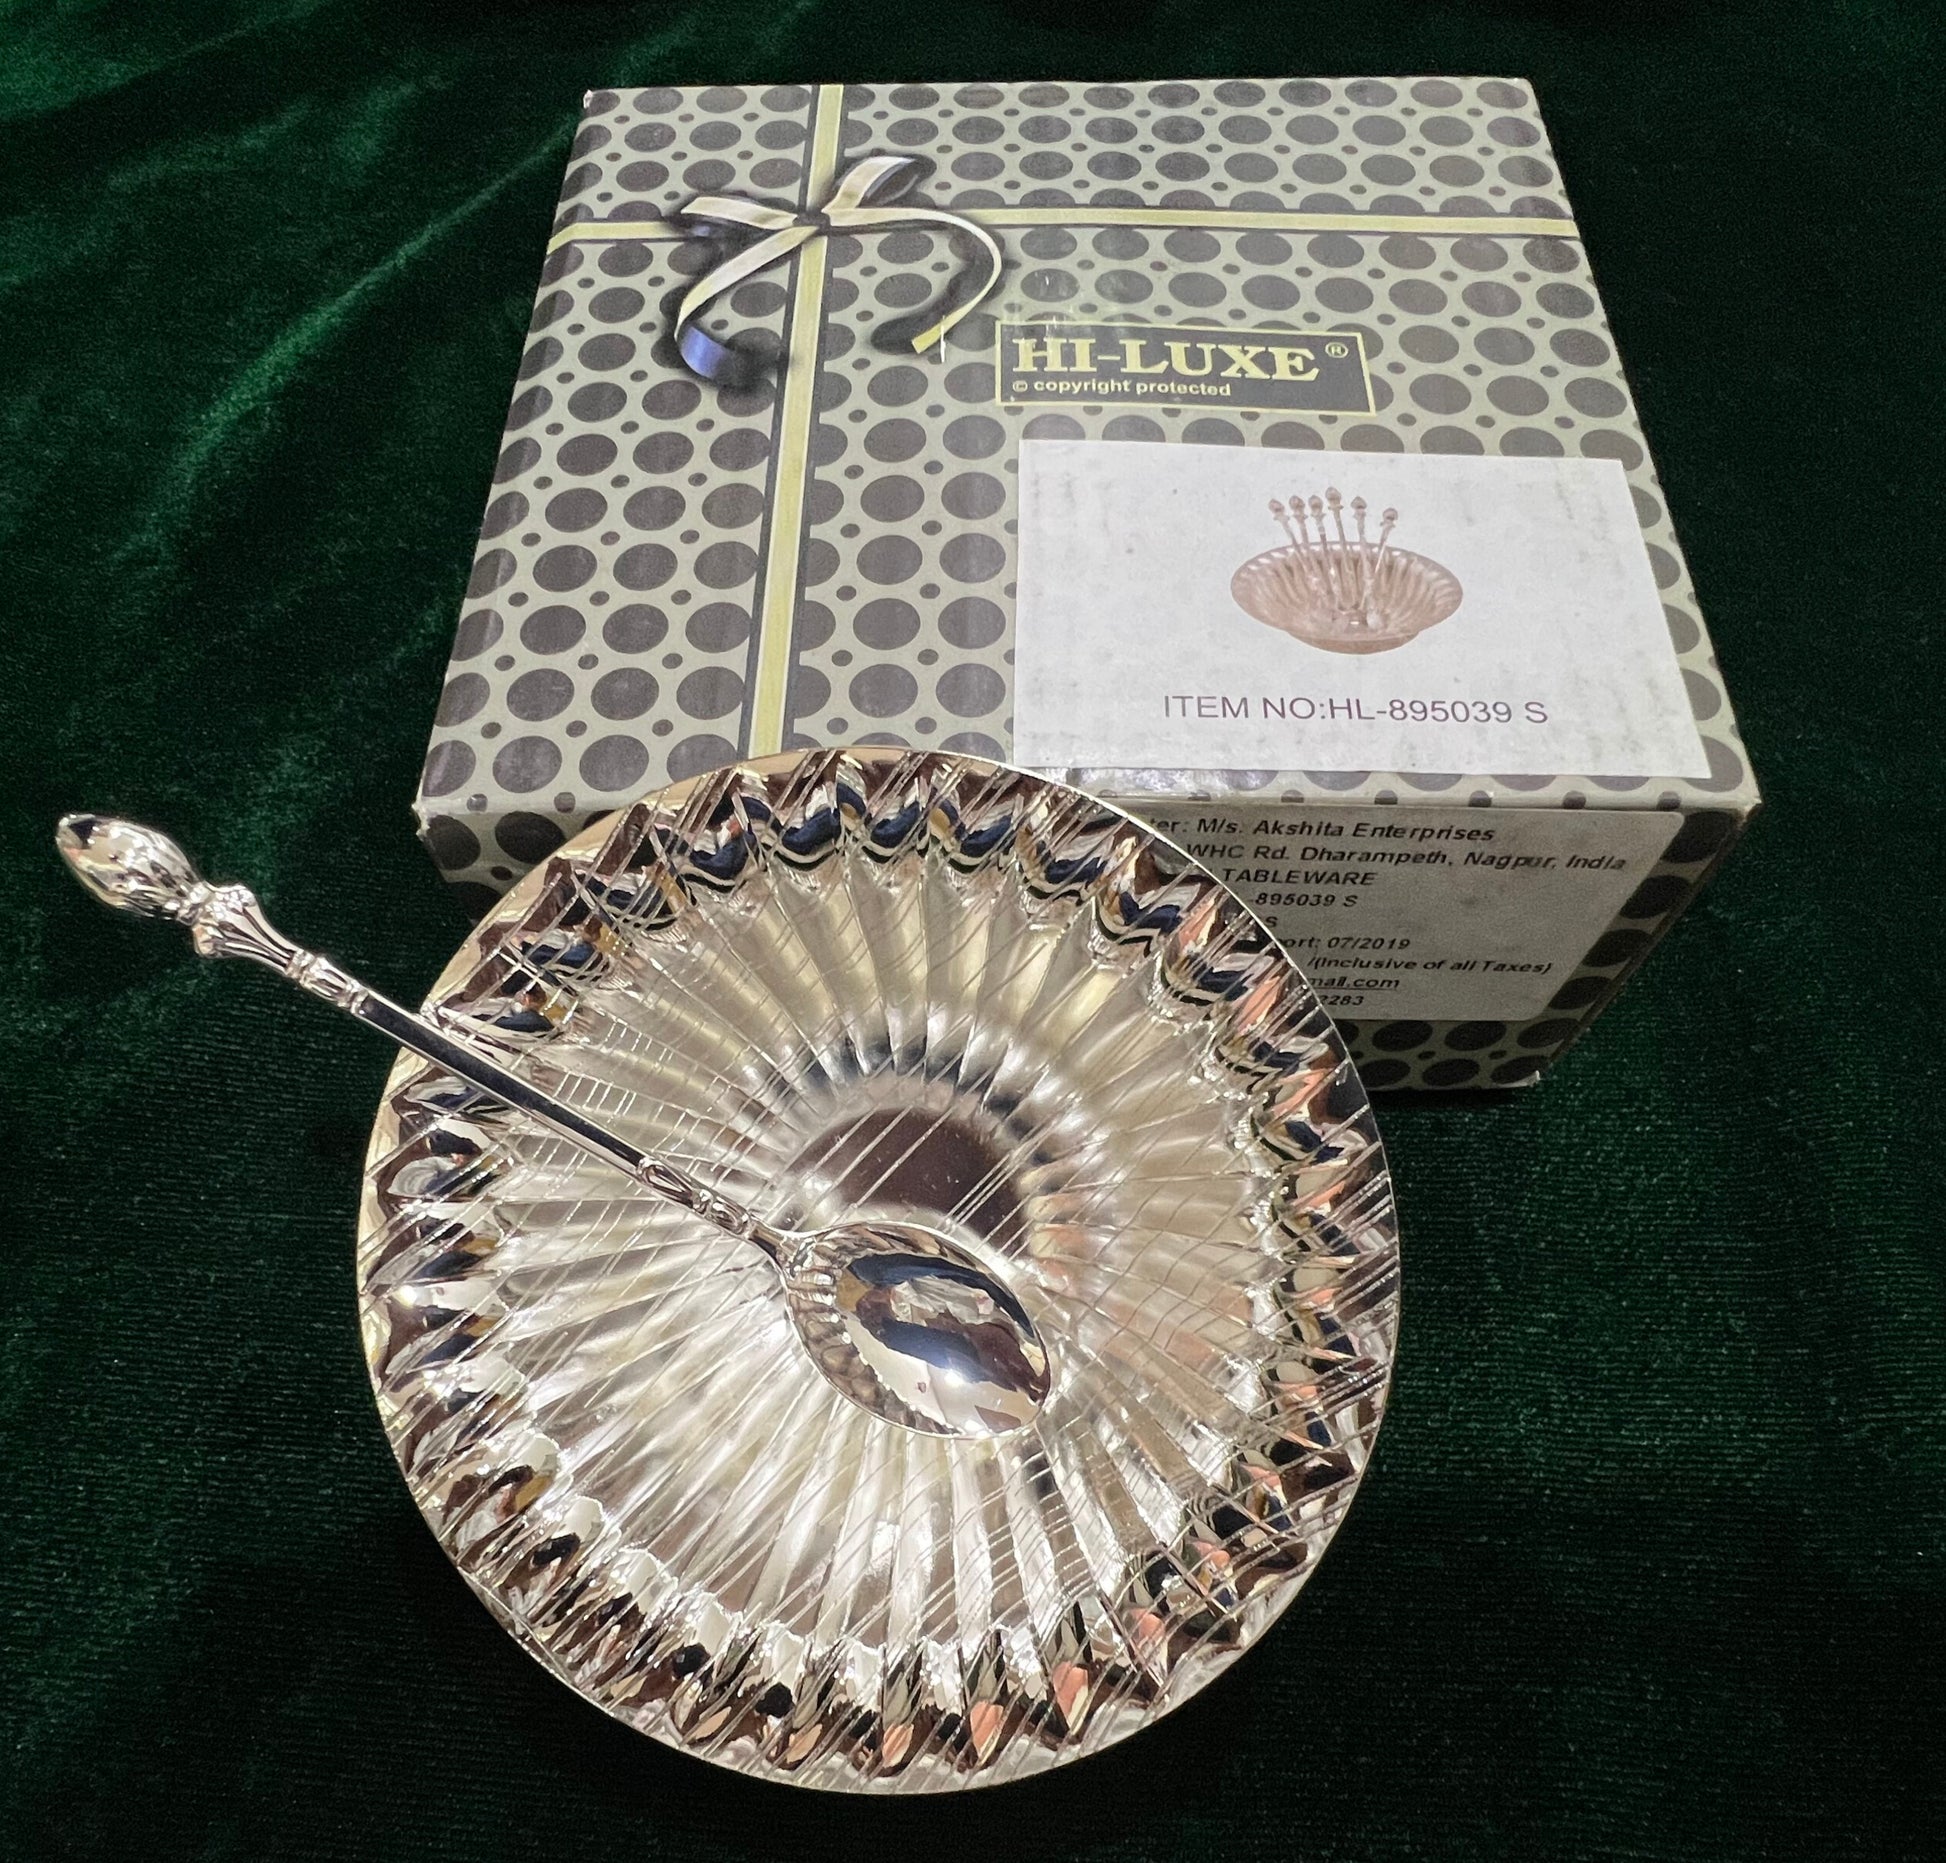 Hiluxe Silver Plated Designer Premium Bowl Set With Spoon | 6 Bowl | 6 Spoon | Home | Gifting | Gift Box | - Premium Bowl Set With Spoon from Hiluxe - Just Rs. 2160! Shop now at Surana Sons